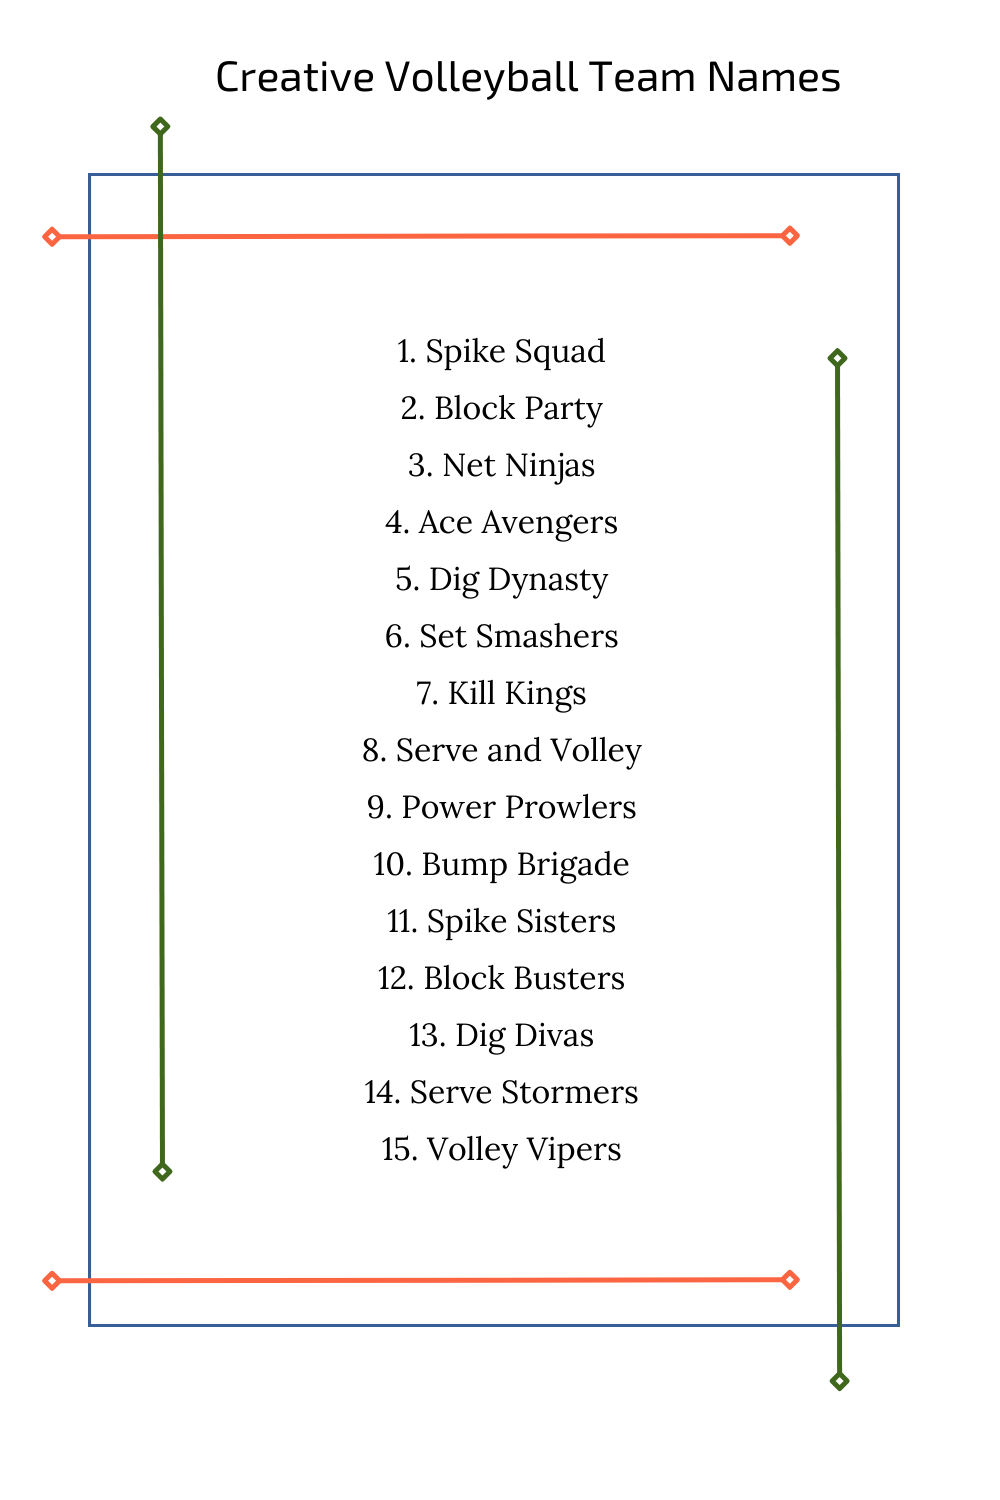 Creative Volleyball Team Names